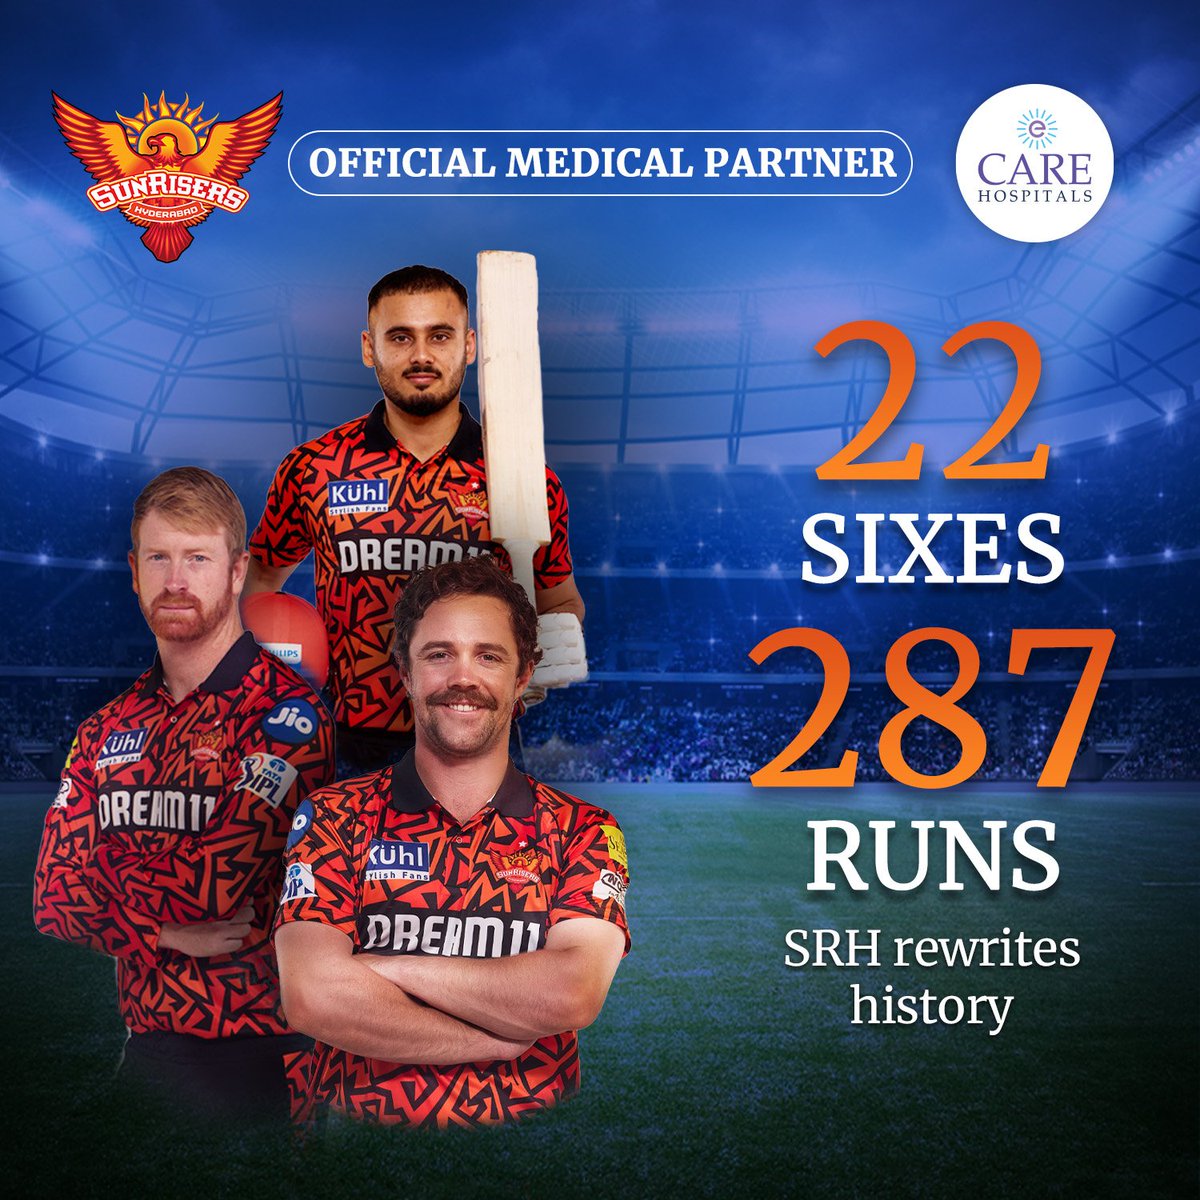 SRH's phenomenal achievement of 22 sixes and 287 runs is a testament to their unwavering boldness and courage. As the Official Medical Partner, CARE Hospitals applauds their remarkable performance in rewriting the history.

#CAREHospitals #TransformingHealthcare #SRH